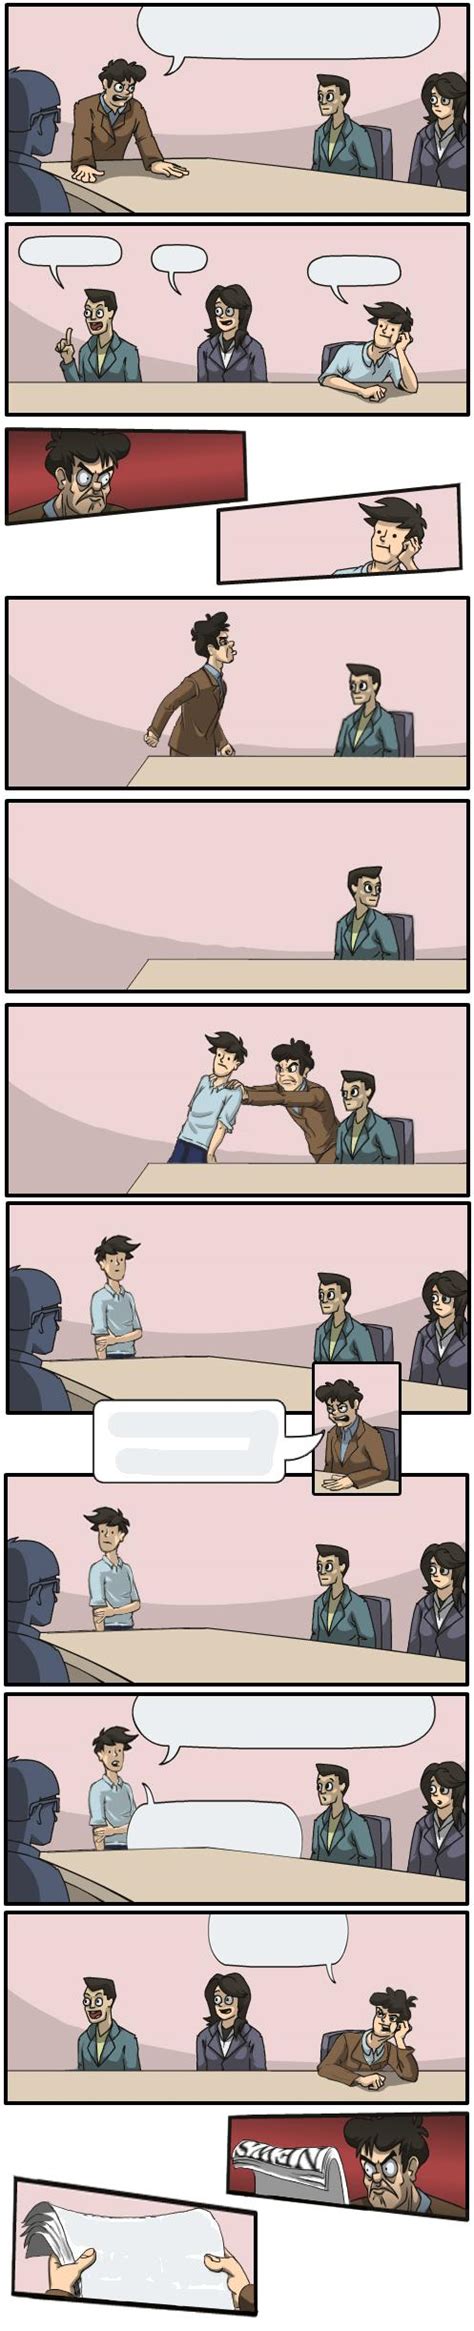 Boardroom Meeting Suggestion Extended Template Boardroom Suggestion